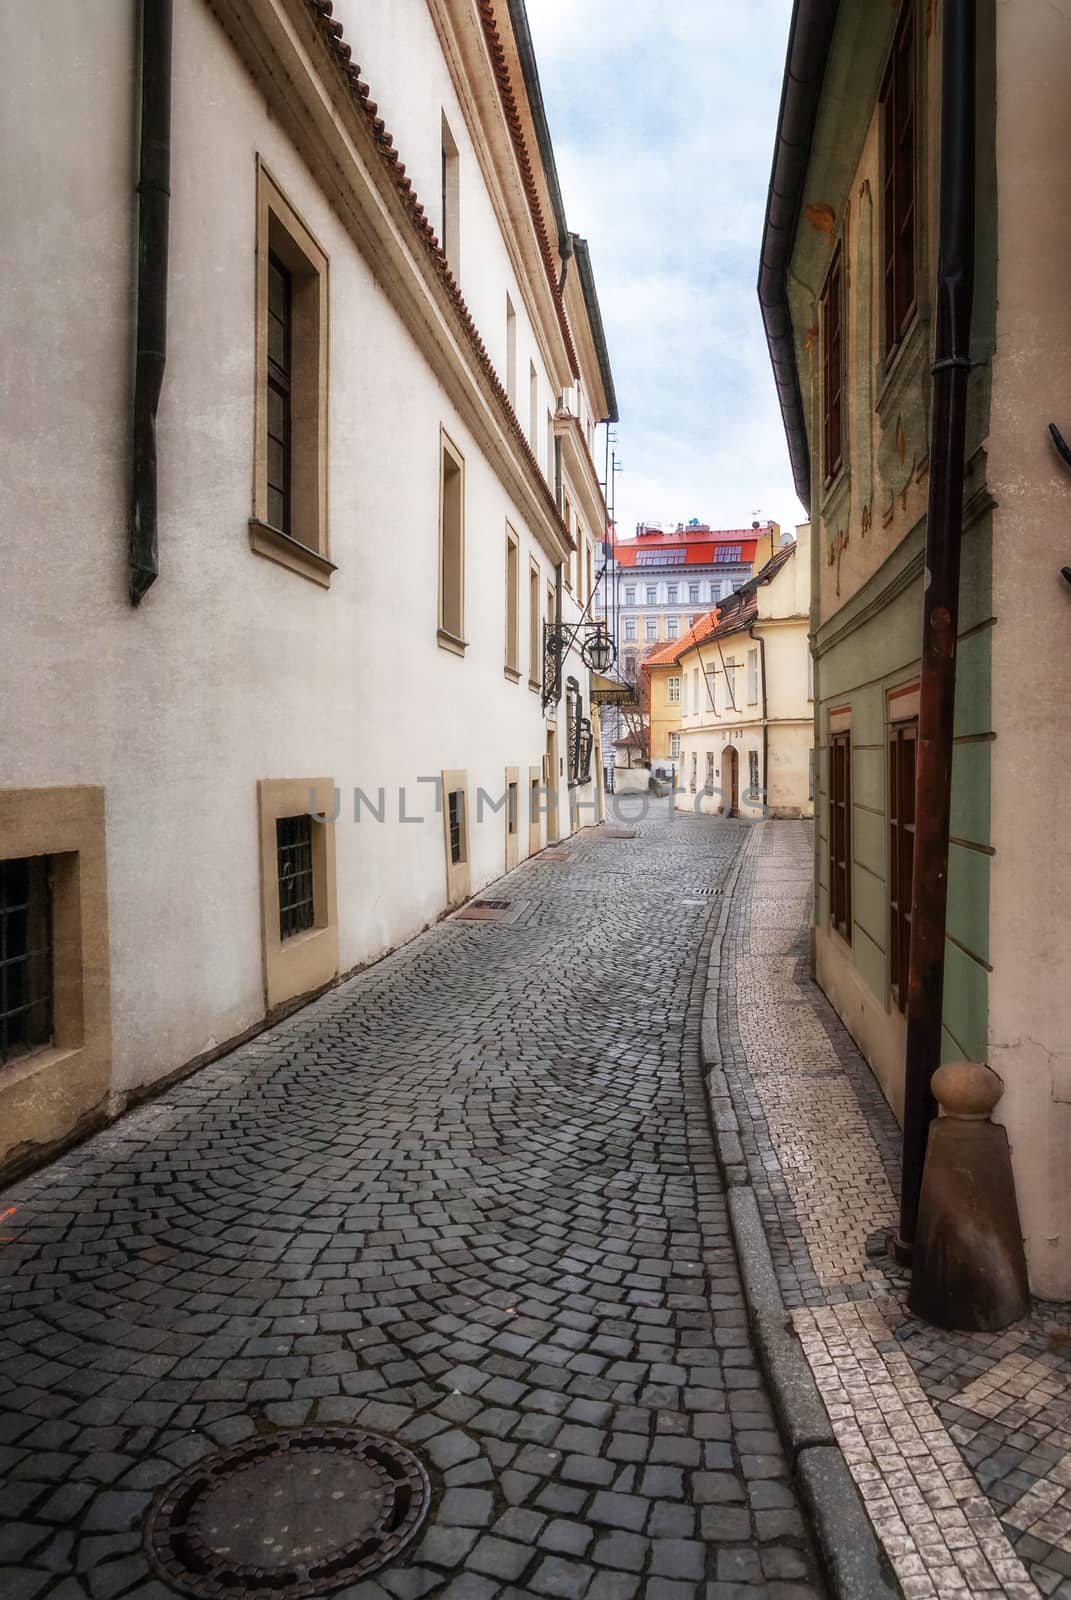 Morning in old city without people and cars. Prague, Czech Republic